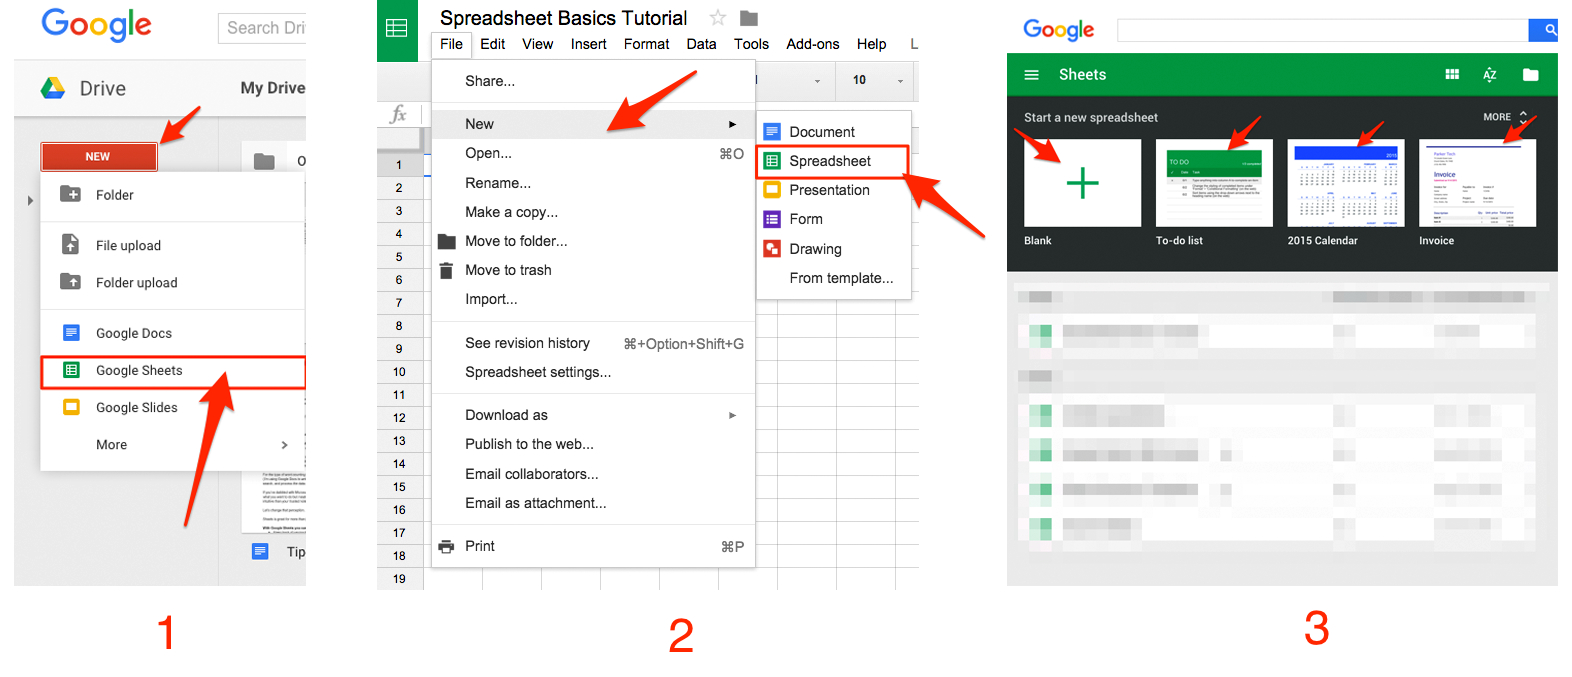 Create Spreadsheet In Google Docs With Google Sheets 101: The Beginner's Guide To Online Spreadsheets  The